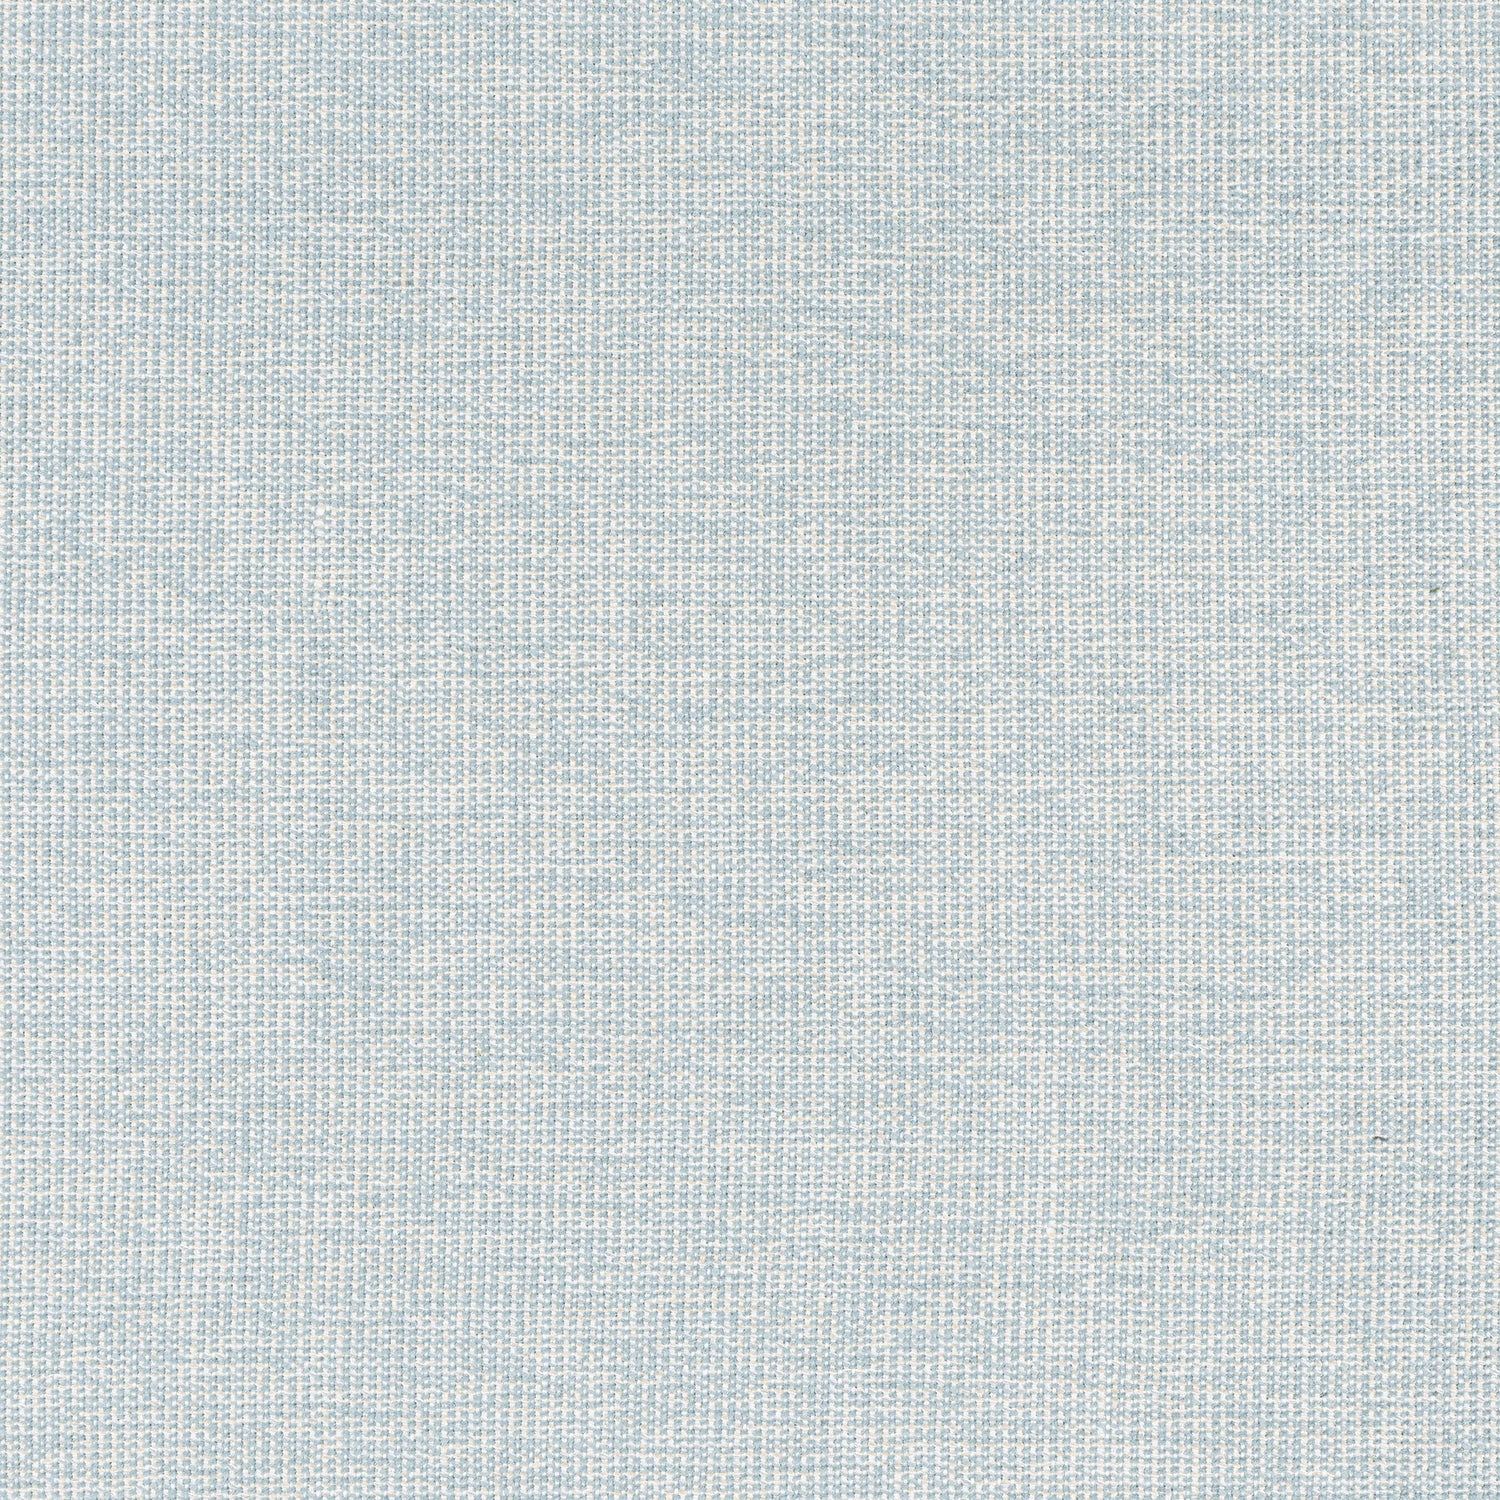 Sacchi fabric in aqua color - pattern number W8764 - by Thibaut in the Haven Textures collection